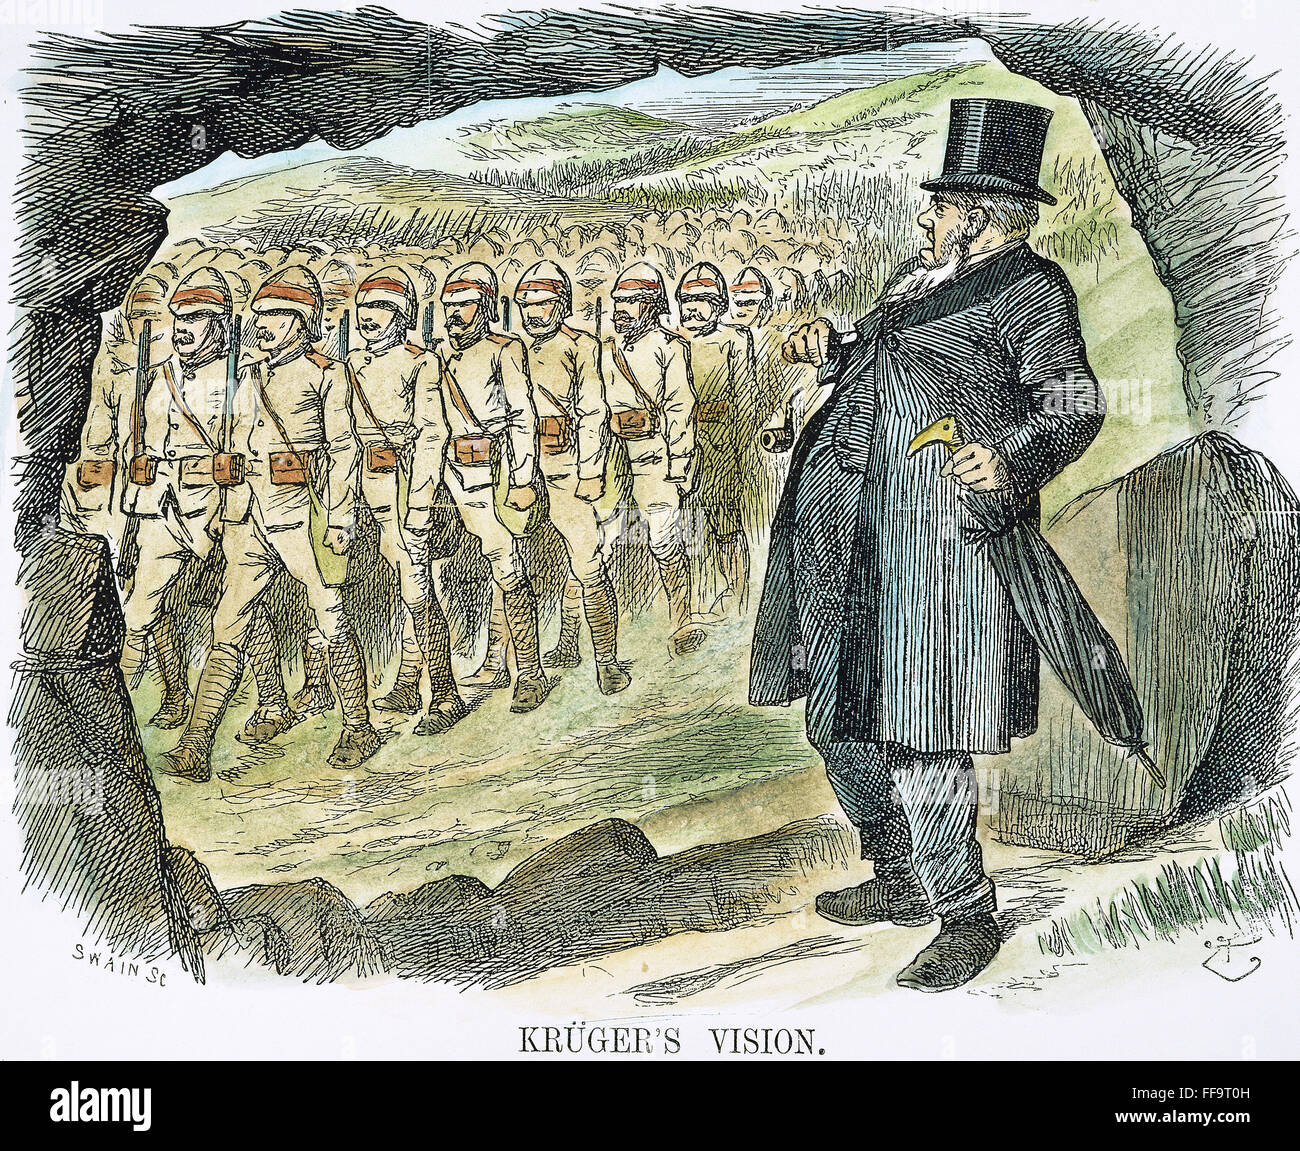 BOER WAR CARTOON, 1899. /n'Kruger's Vision.' At the outbreak of the Boer War, October 1899, Transvaal President, Paul Kruger, imagines seeing endless lines of British soldiers. Contemporary English cartoon by John Tenniel. Stock Photo